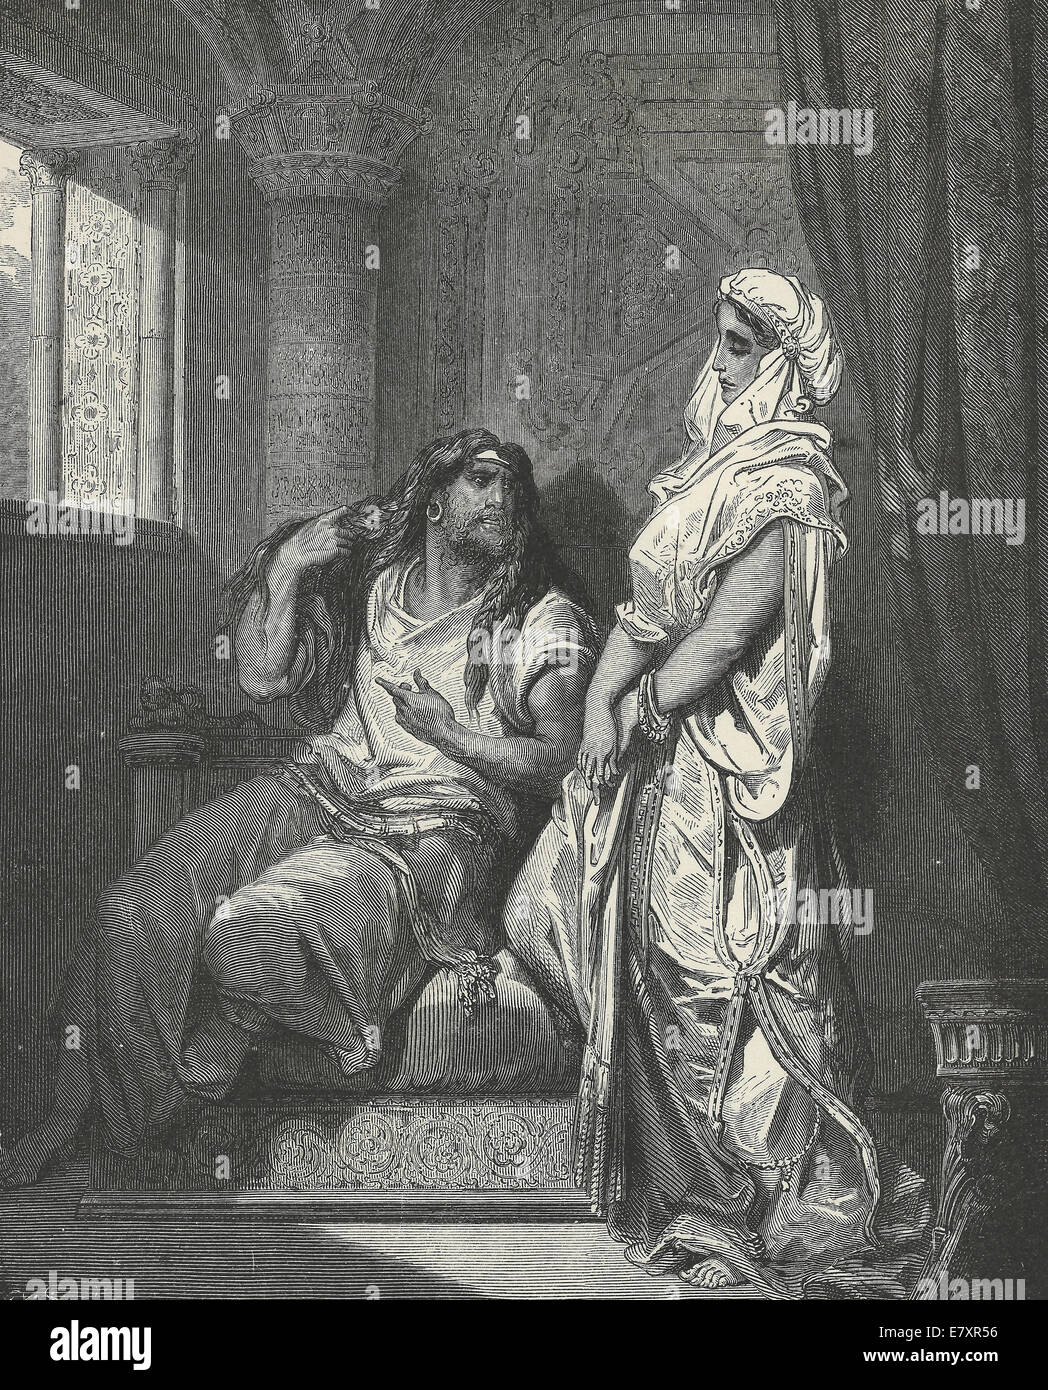 Samson and Delilah, Old Testament Bible Story Stock Photo